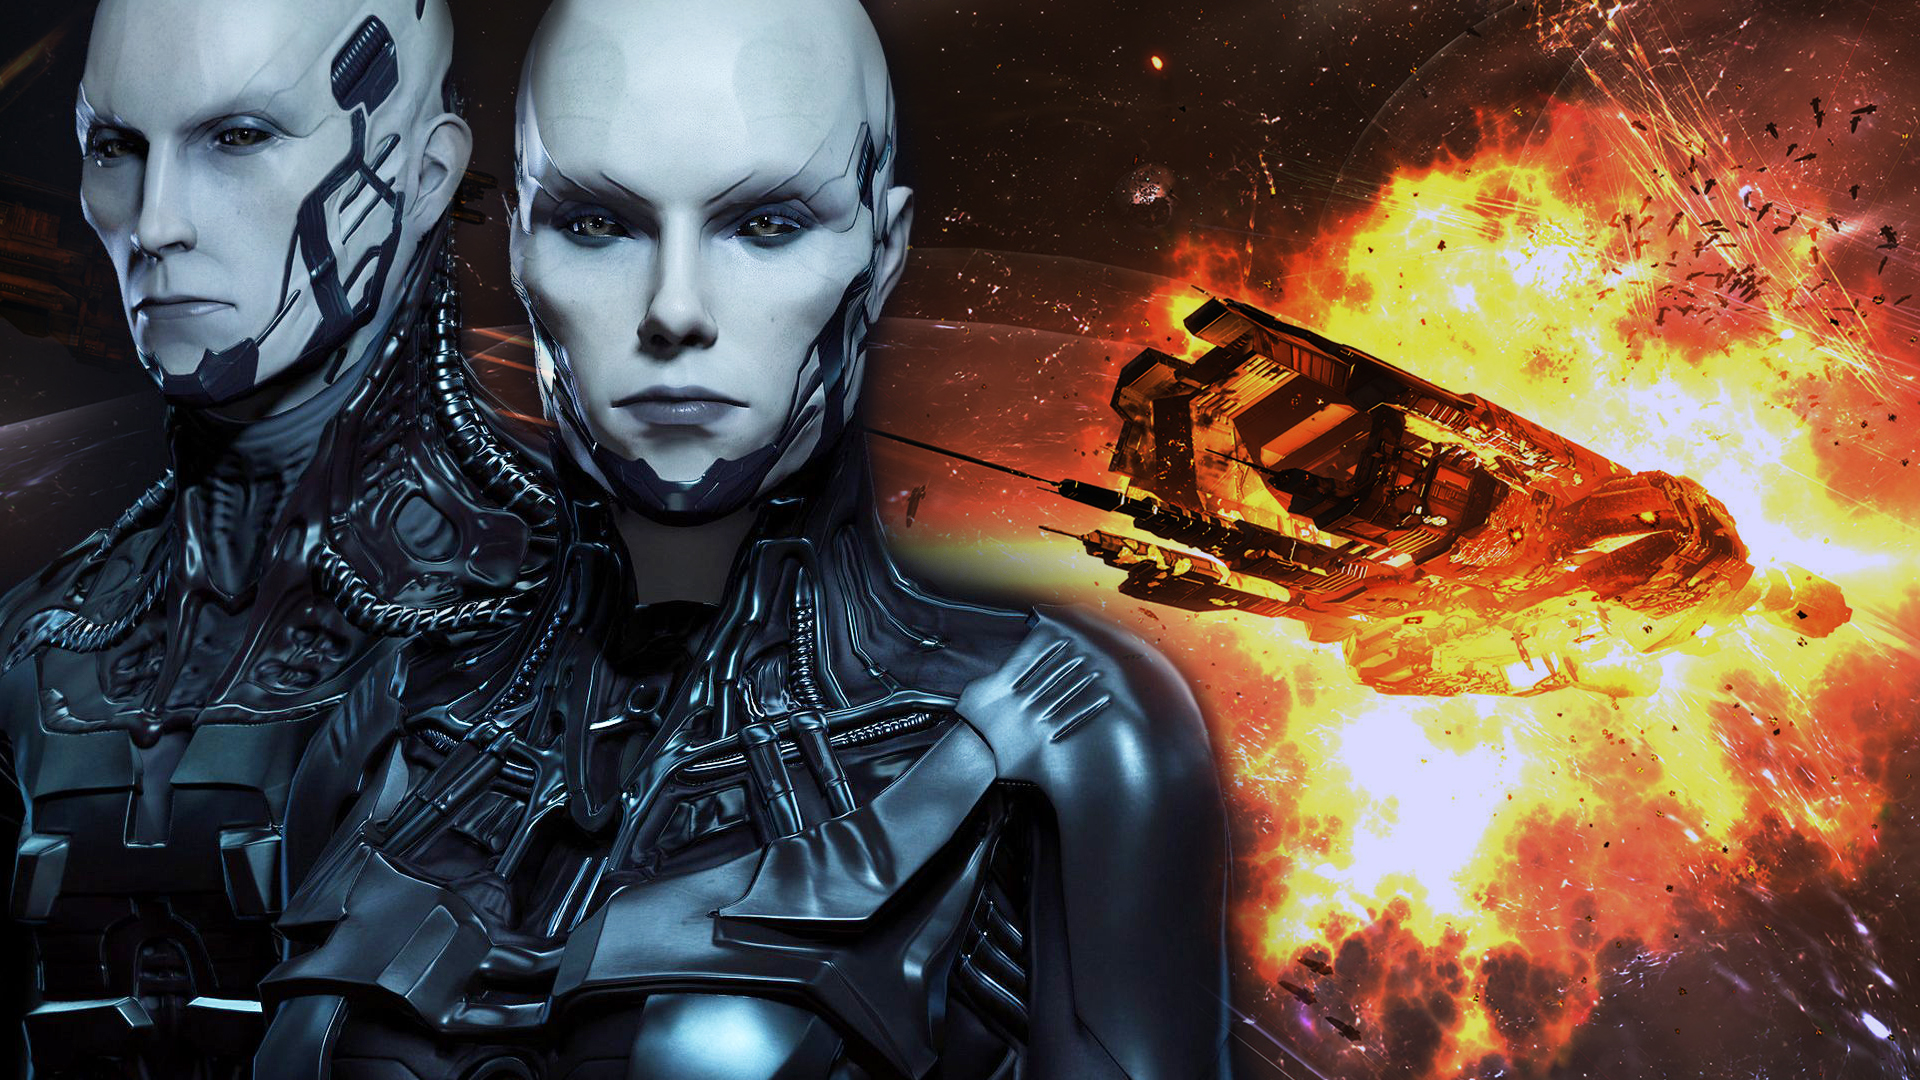 EVE Online is in chaos after an unprecedented alien invasion